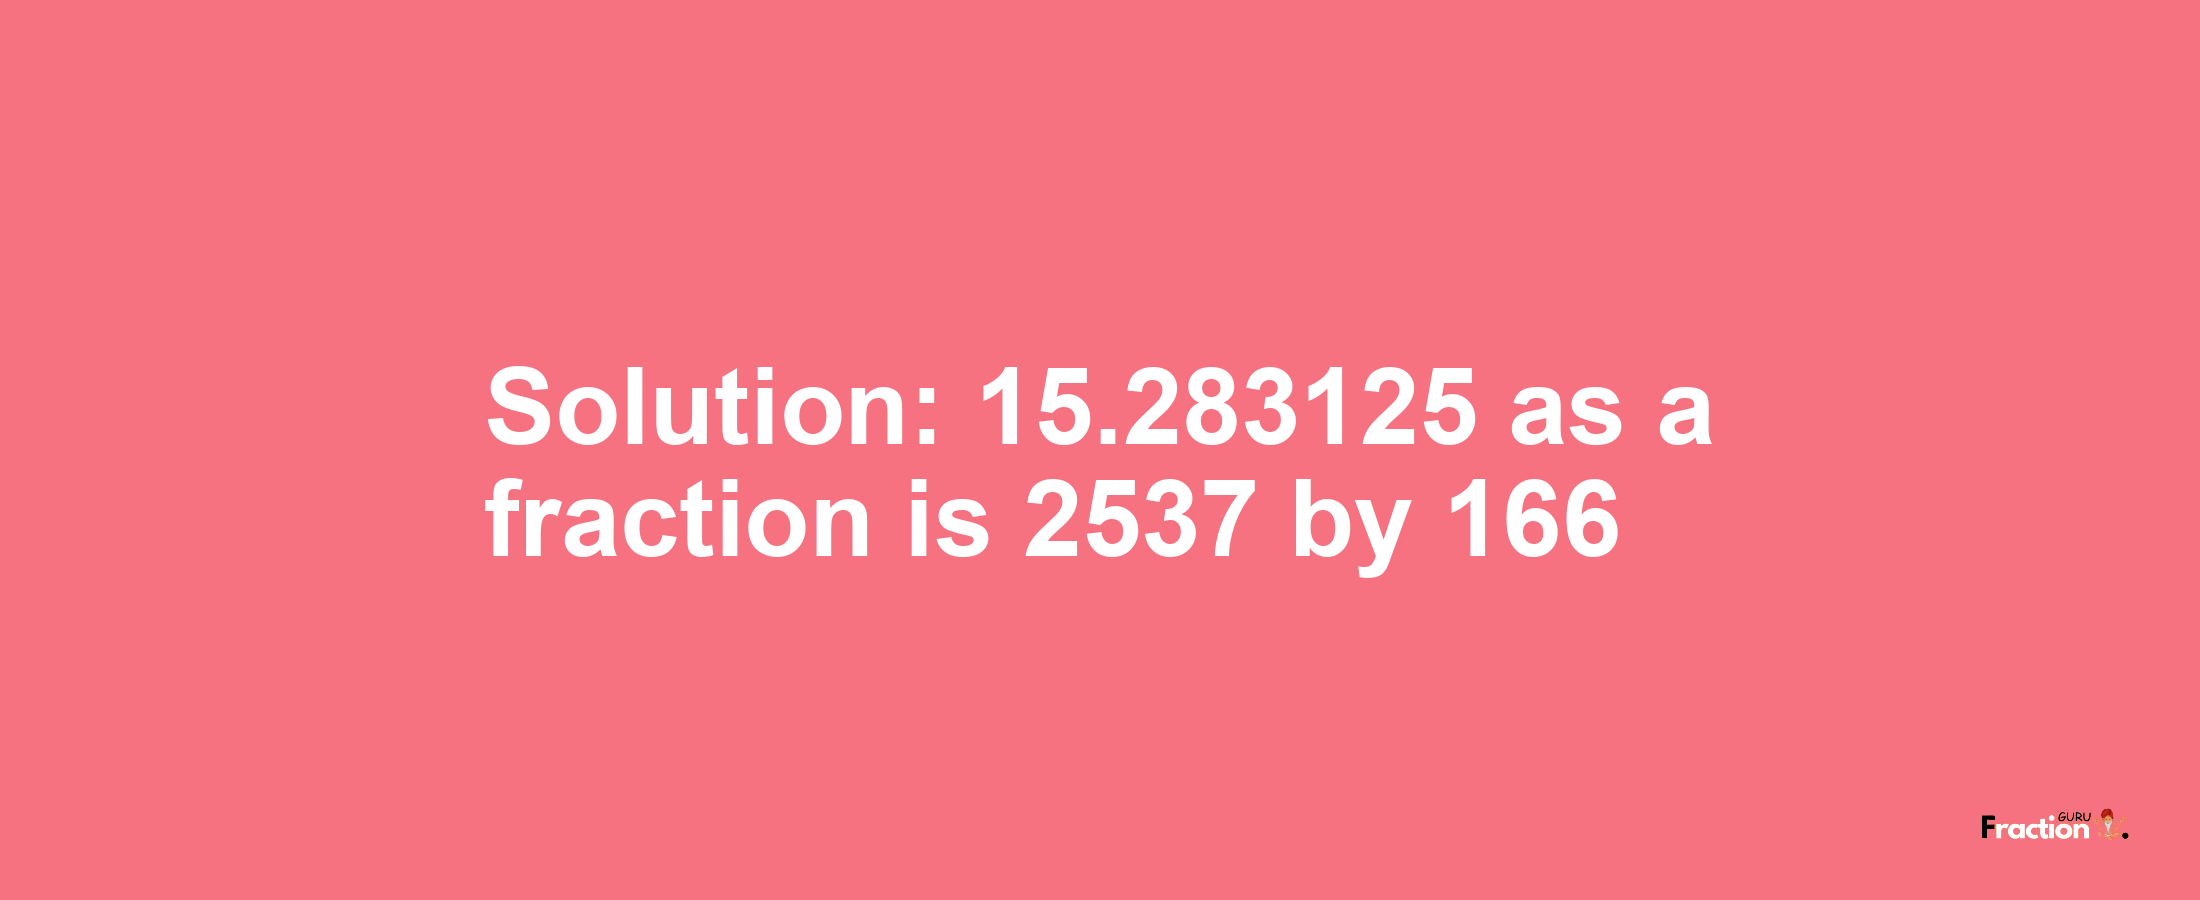 Solution:15.283125 as a fraction is 2537/166